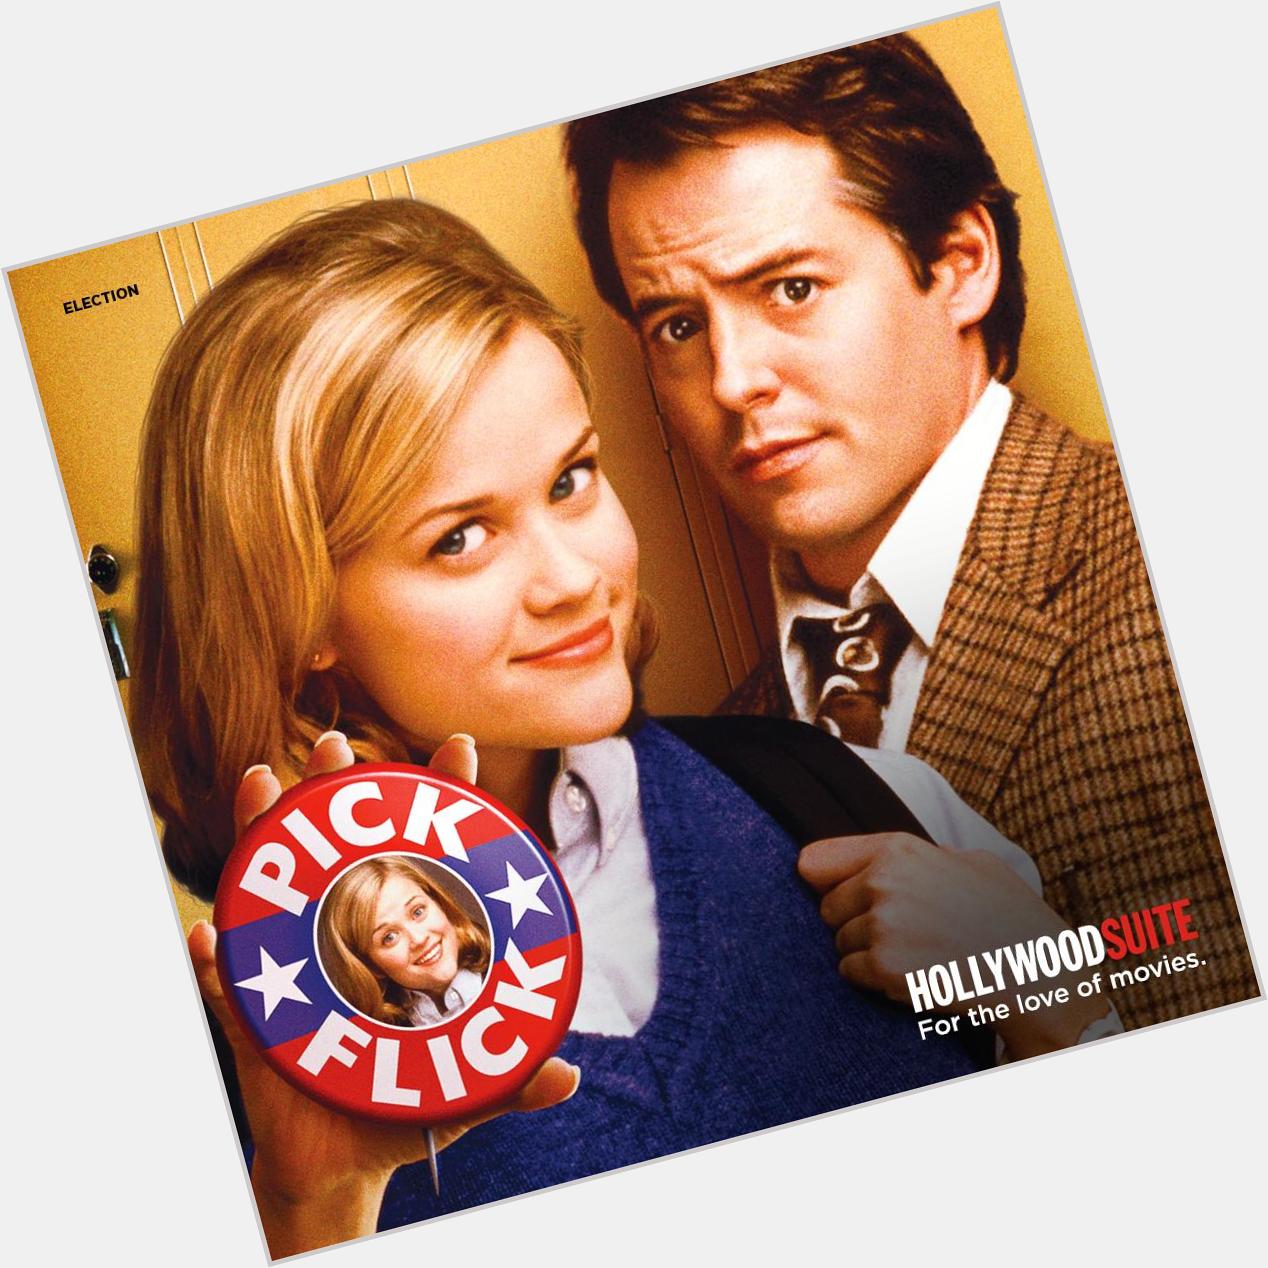 Happy birthday! Matthew Broderick turned 53 yesterday and Reese Witherspoon celebrates 39 today. 